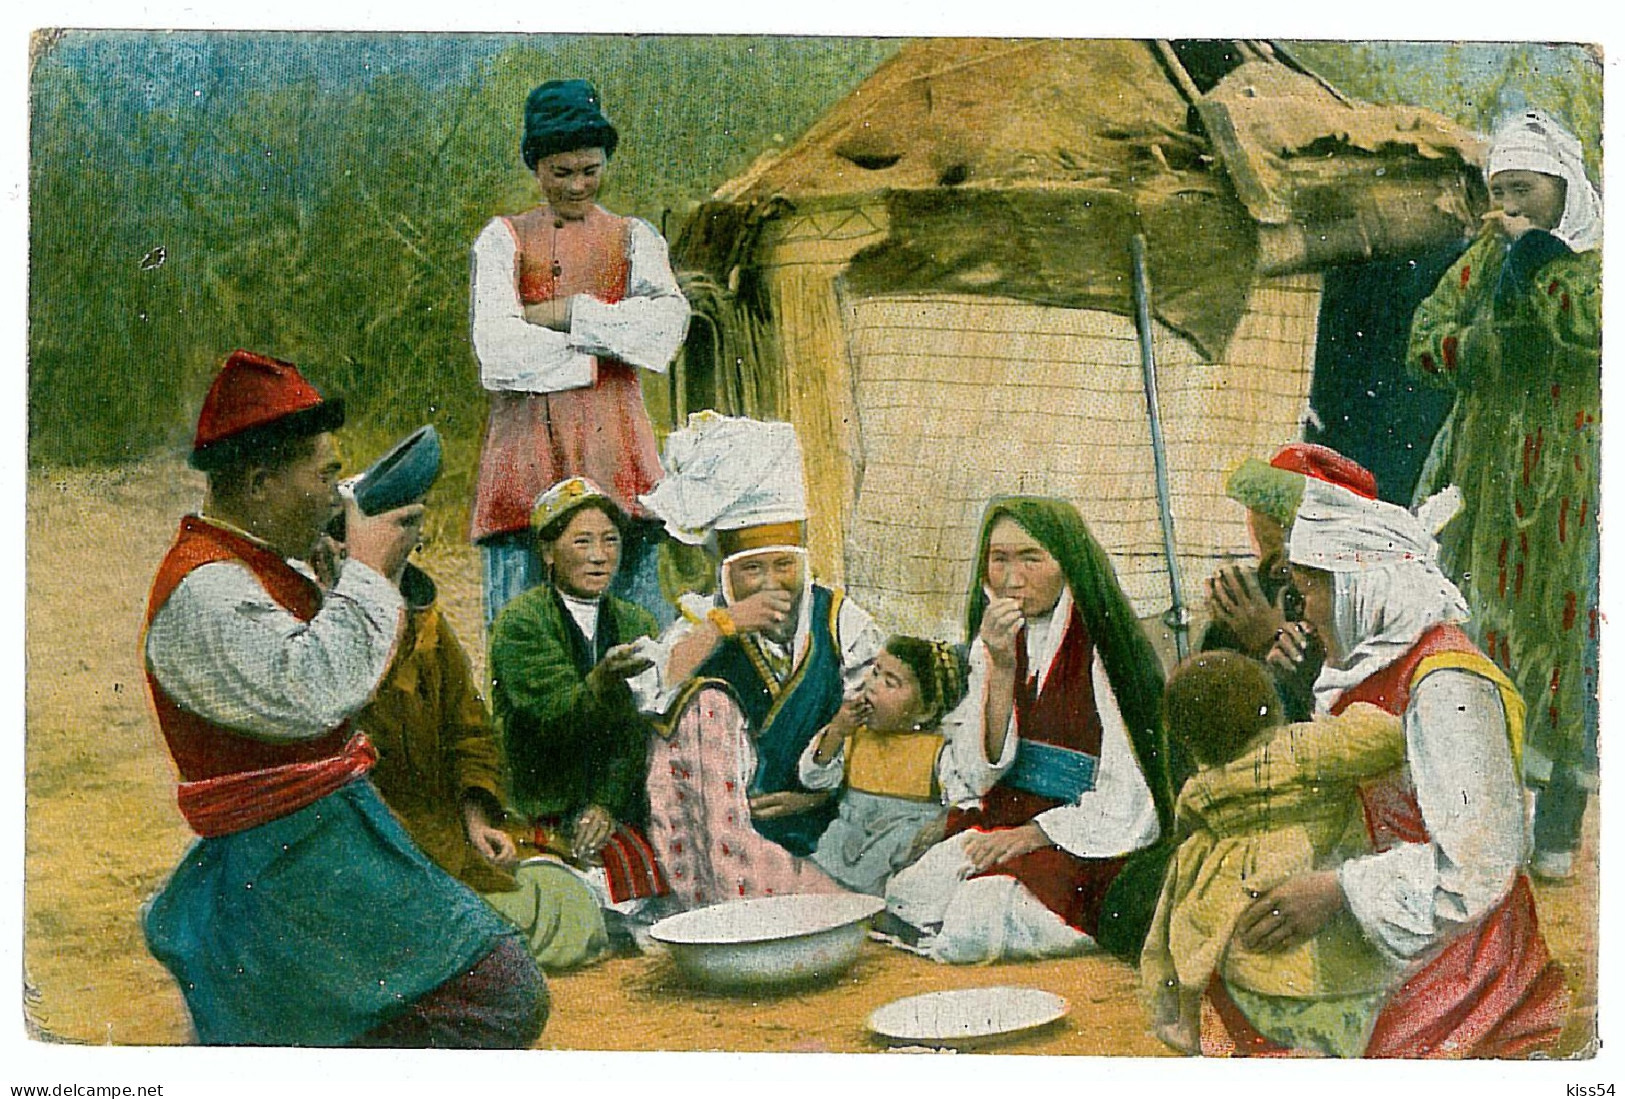 KYR 4 - 7846 ETHNICS, From Central Asian, Kyrgyzstan - Old Postcard - Used - 1917 - Kirghizistan